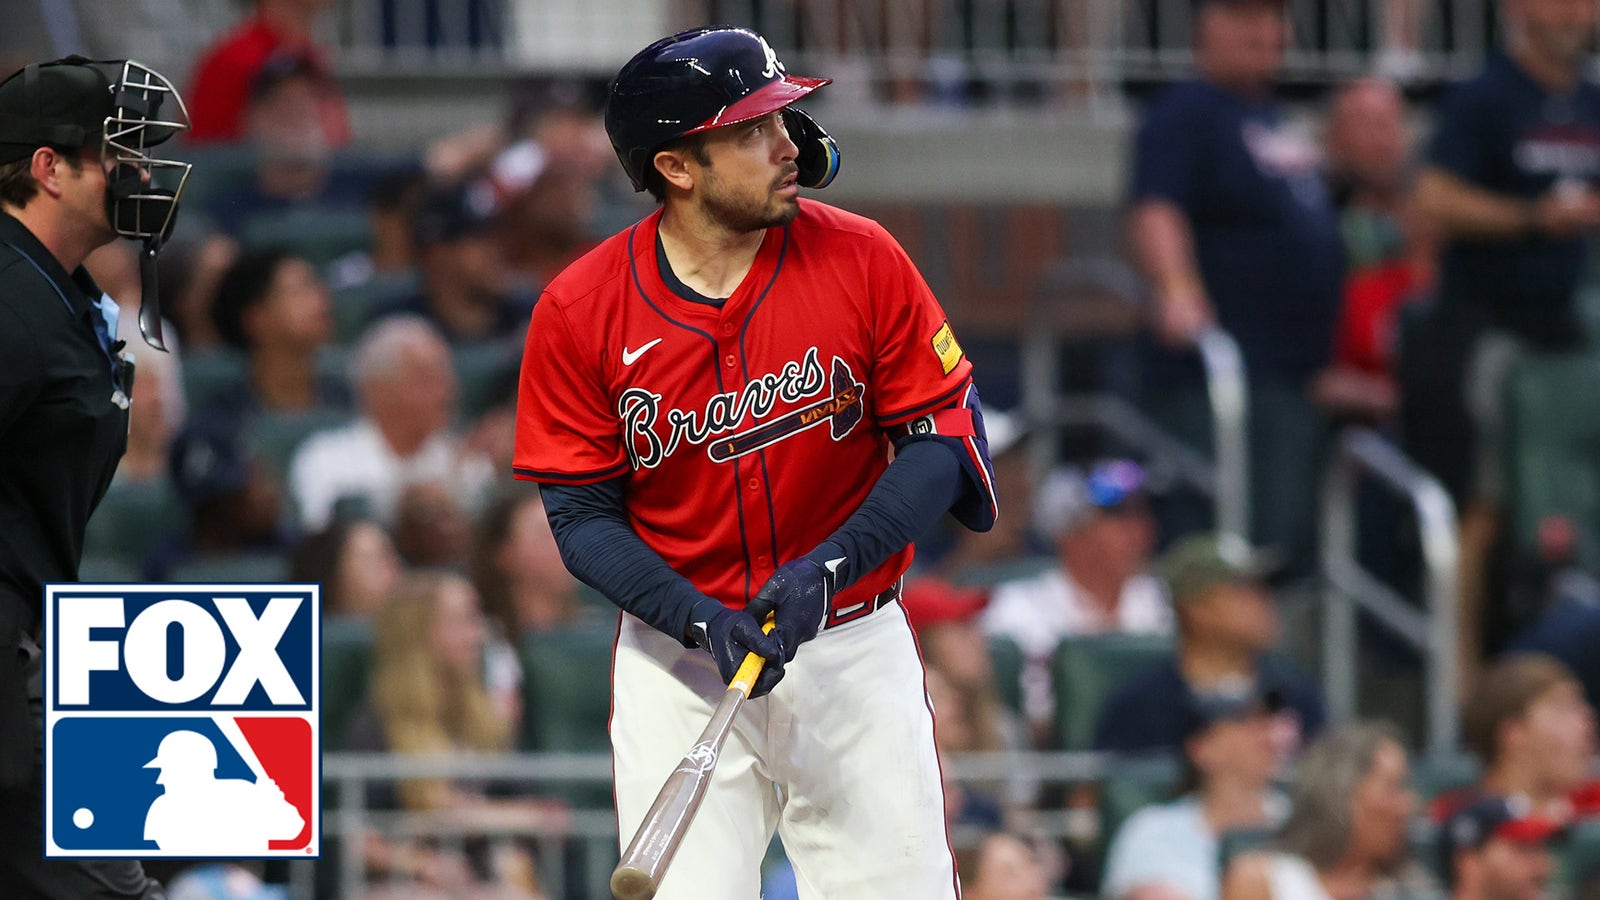 Braves' Travis d'Arnaud's THIRD homer of the night is a grand slam against the Rangers